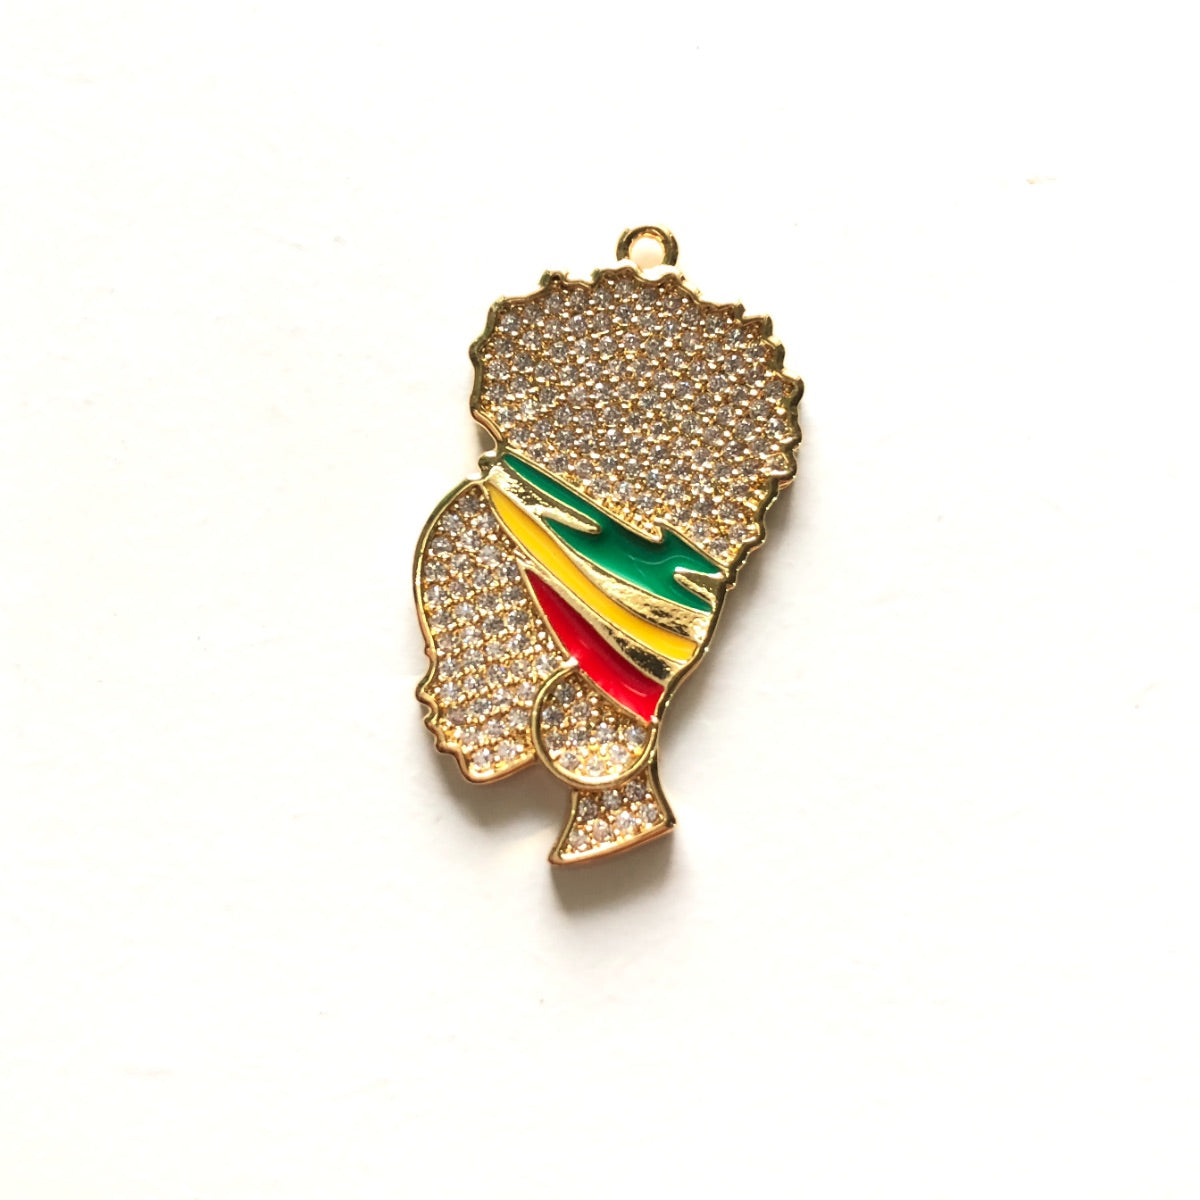 10pcs/lot 35*22mm CZ Paved Afro Girl Charms for Juneteenth Gold CZ Paved Charms Afro Girl/Queen Charms Juneteenth & Black History Month Awareness Charms Beads Beyond